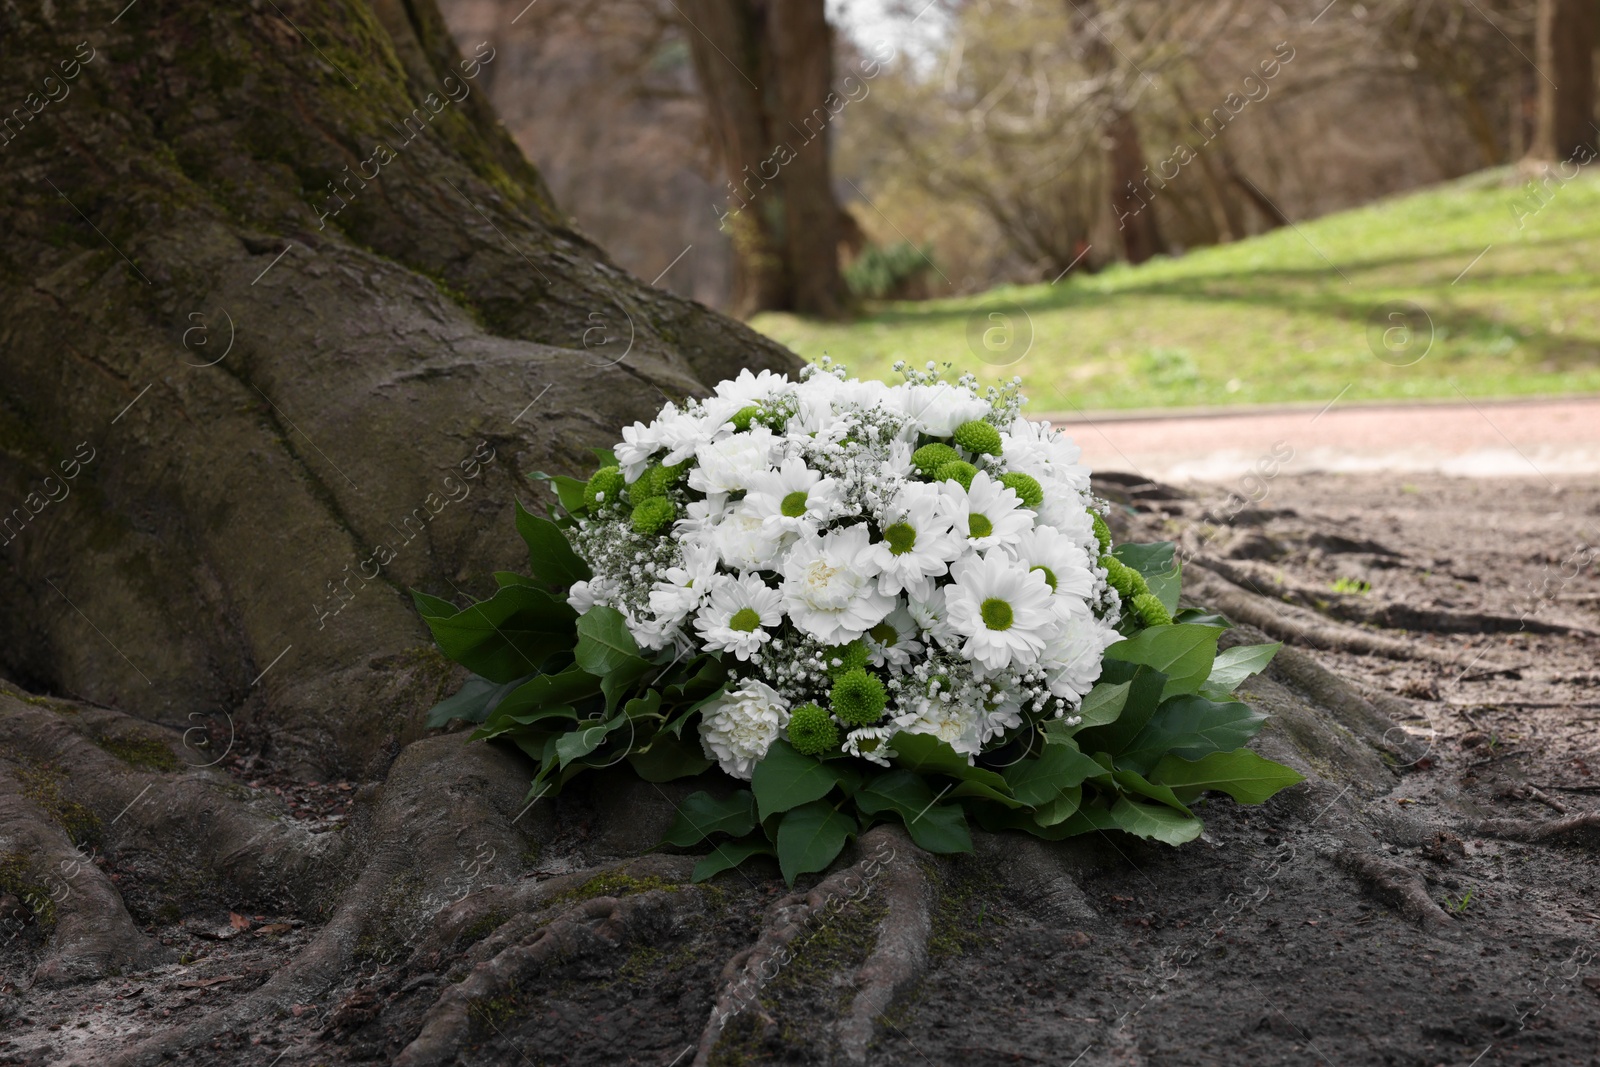 Photo of Funeral wreath of flowers near tree outdoors